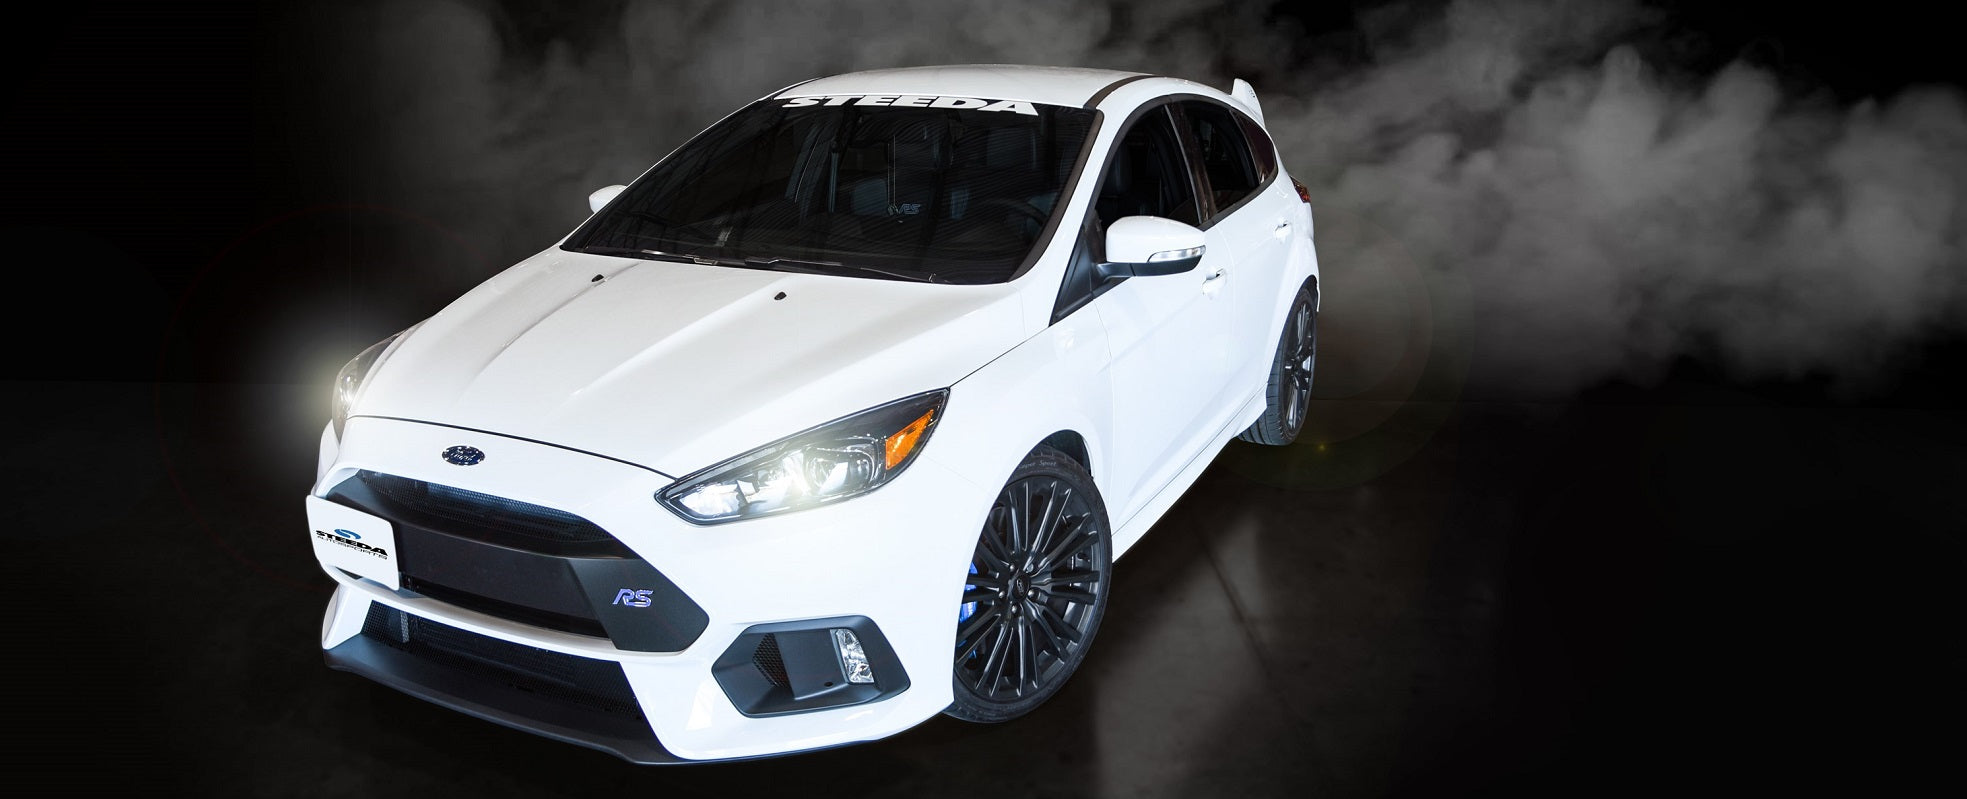 The Best Ford Performance Parts for Your New Focus RS